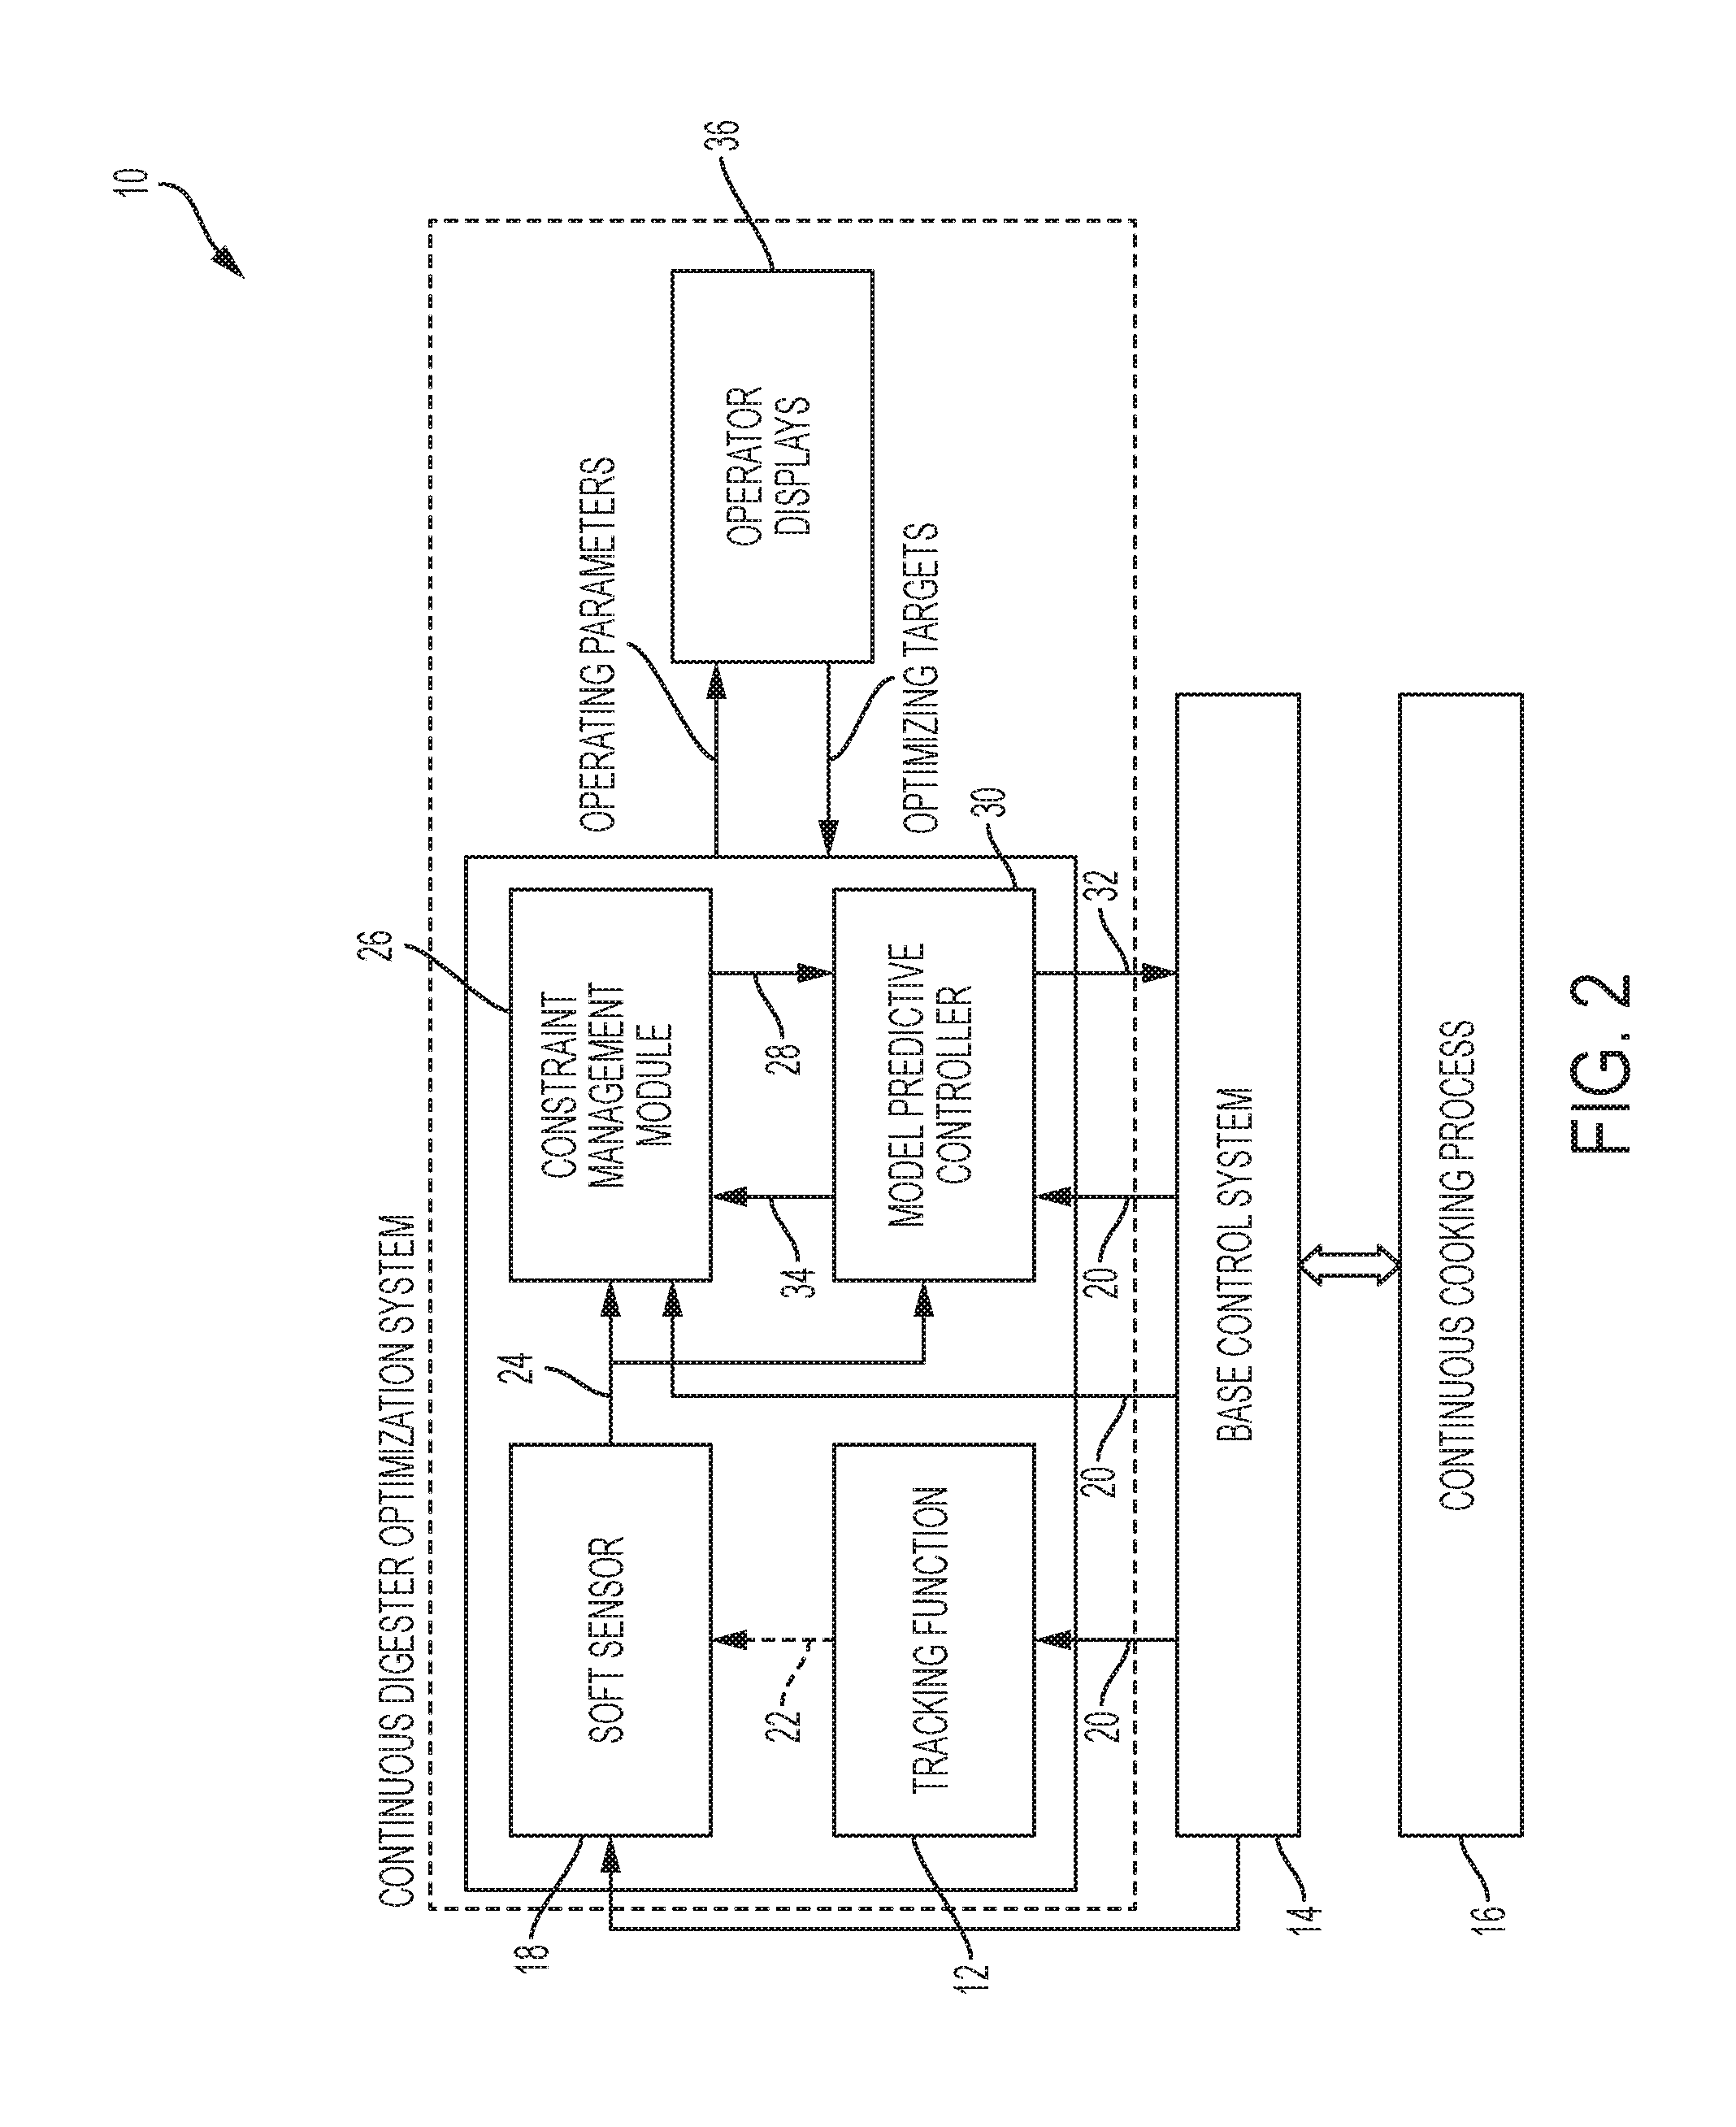 Systems and methods for advanced optimization of continuous digester operation